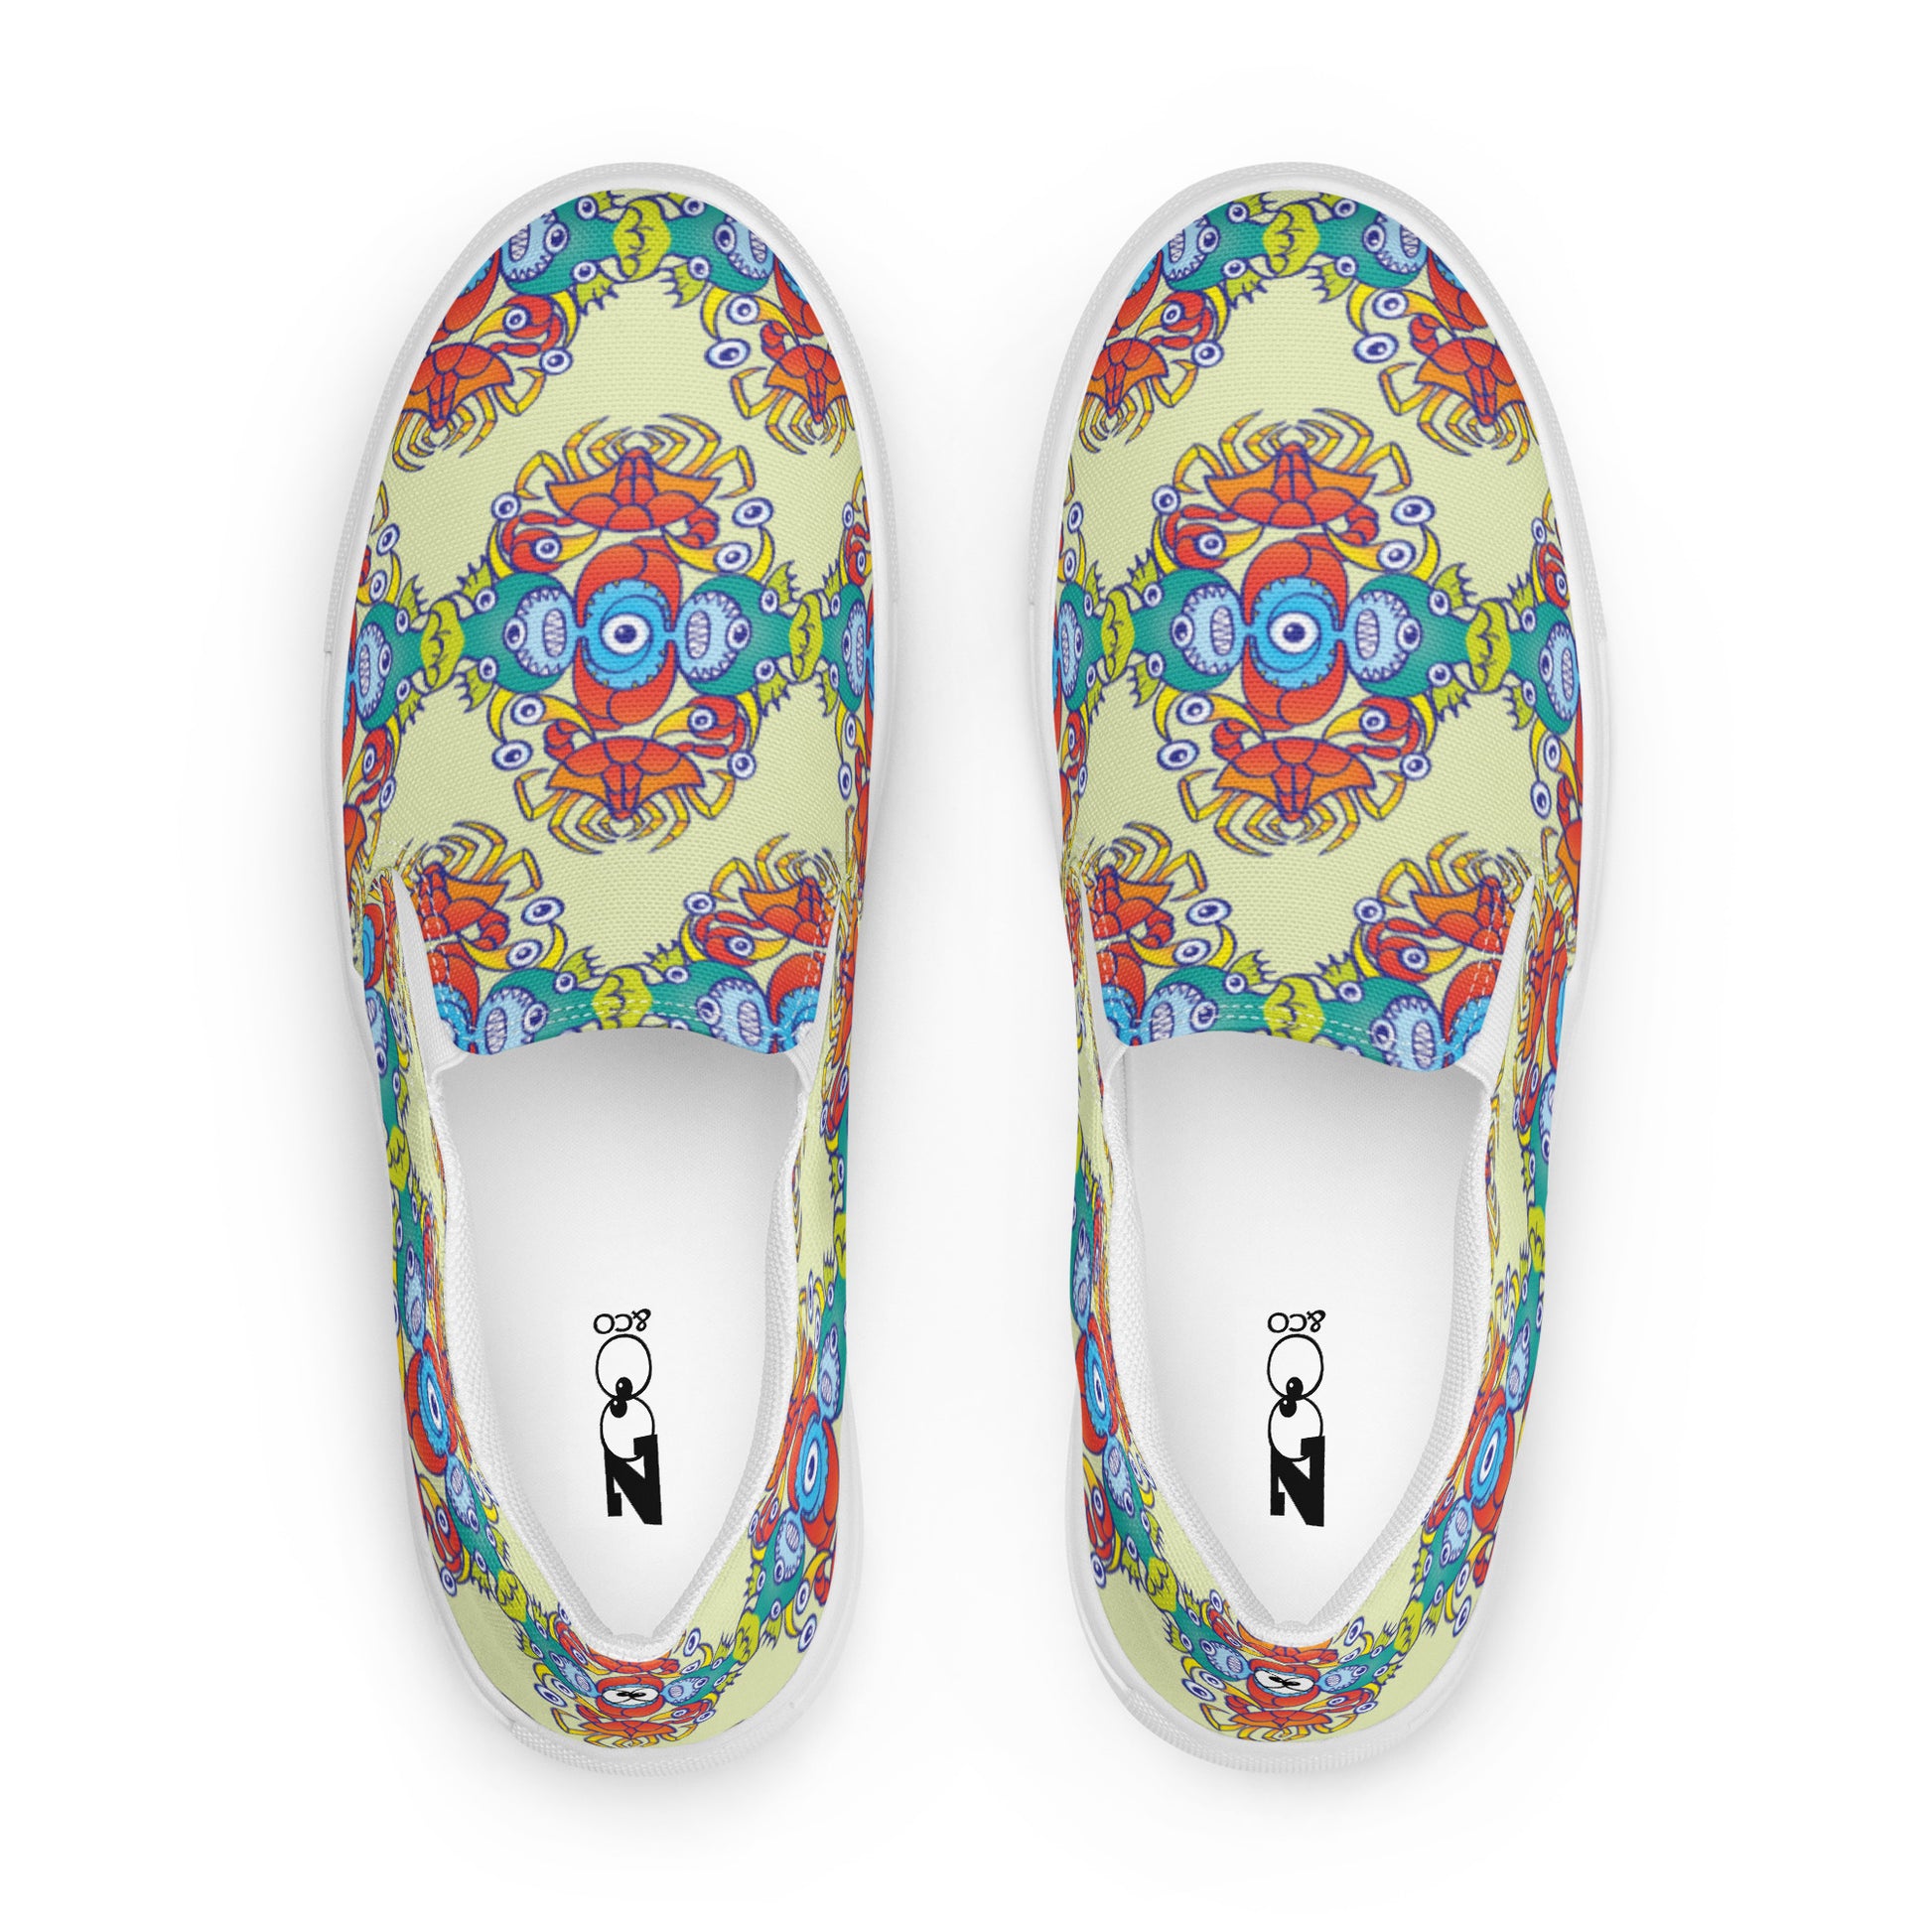 Crabs, octopuses and fish from a tropical sunny beach Men’s slip-on canvas shoes. Top view